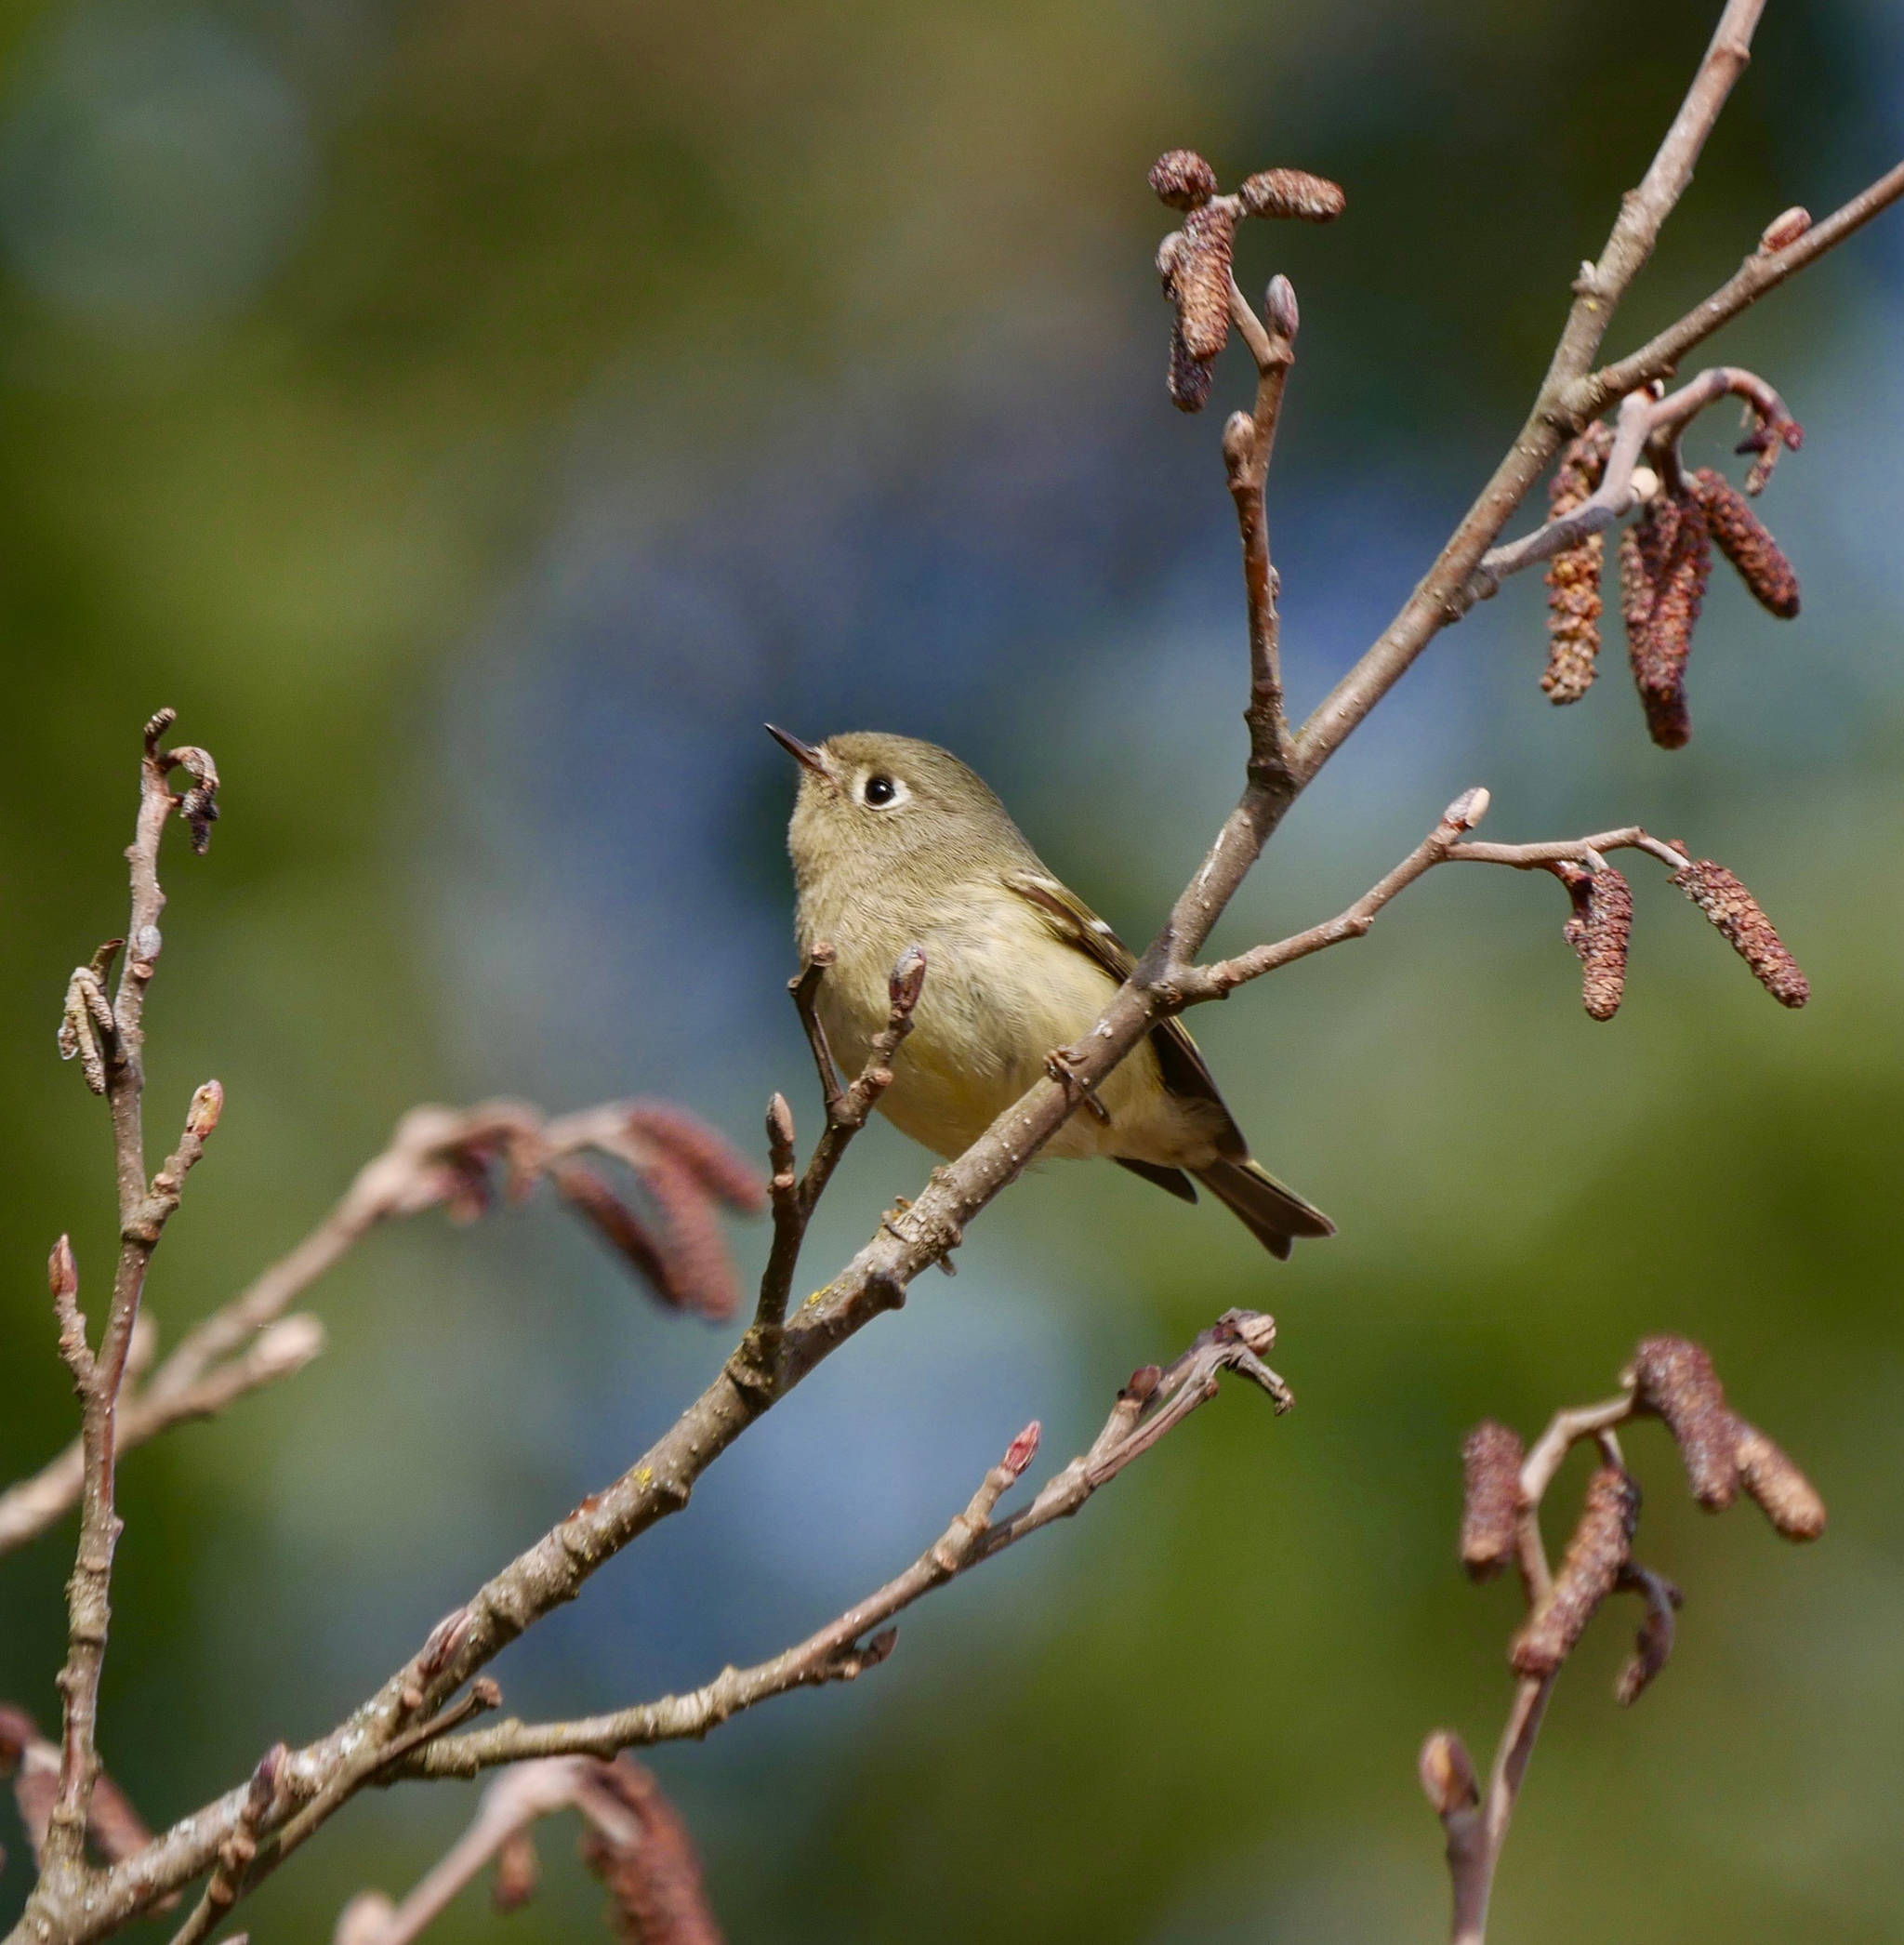 A ruby-crowned kinglet at the Mendenhall Wetlands on May 22, 2019. (Courtesy Photo | Janine Reep)